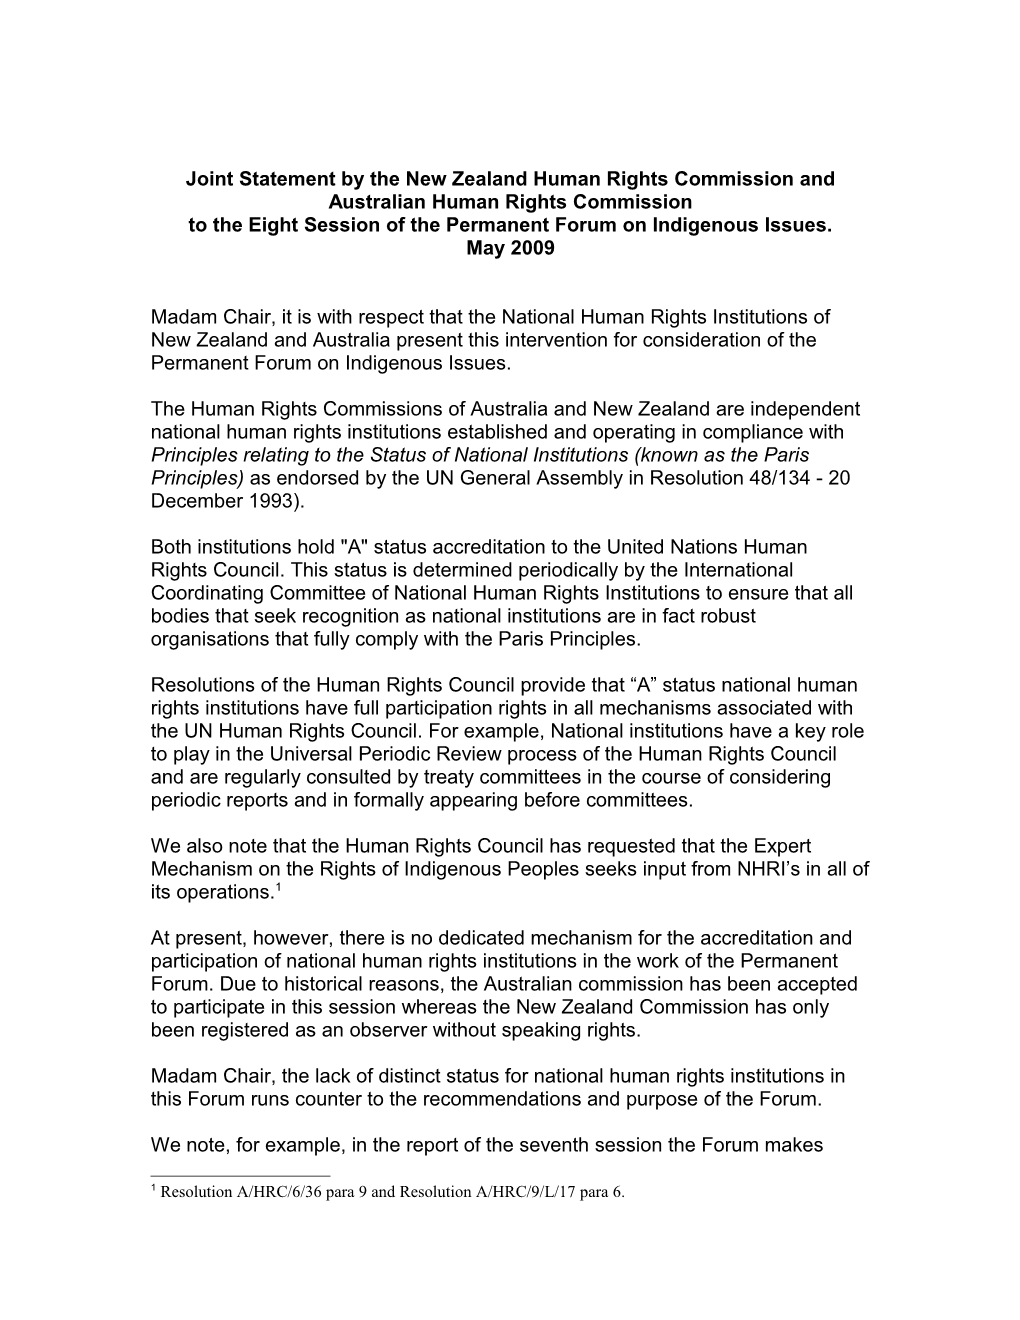 Joint Statement by the National Human Rights Institutions in Australia and New Zealand